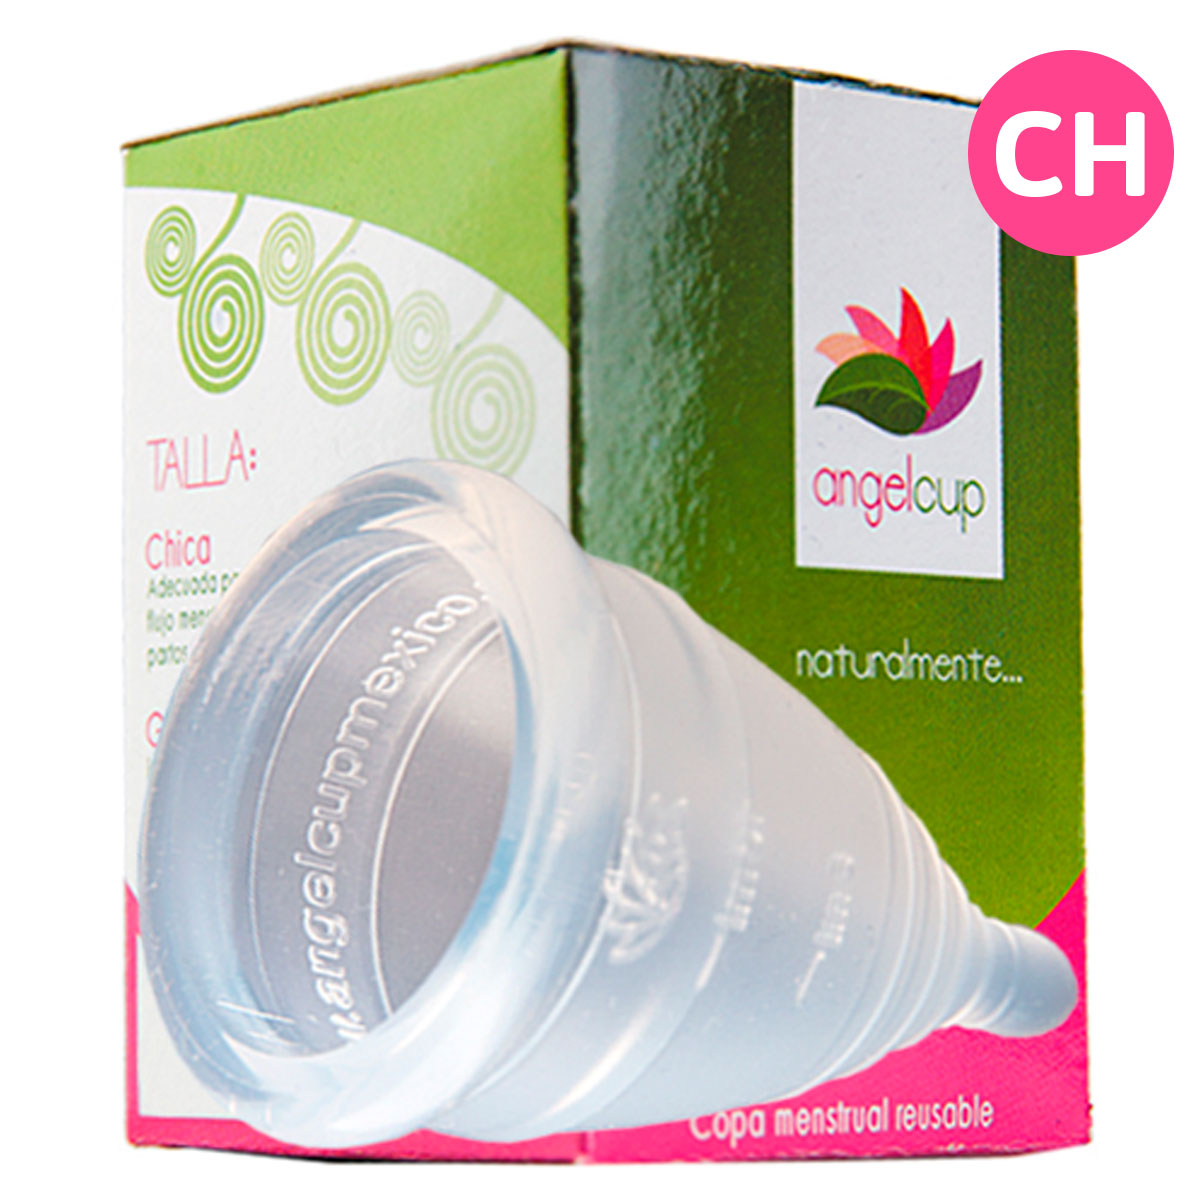 copa menstrual angel cup chica